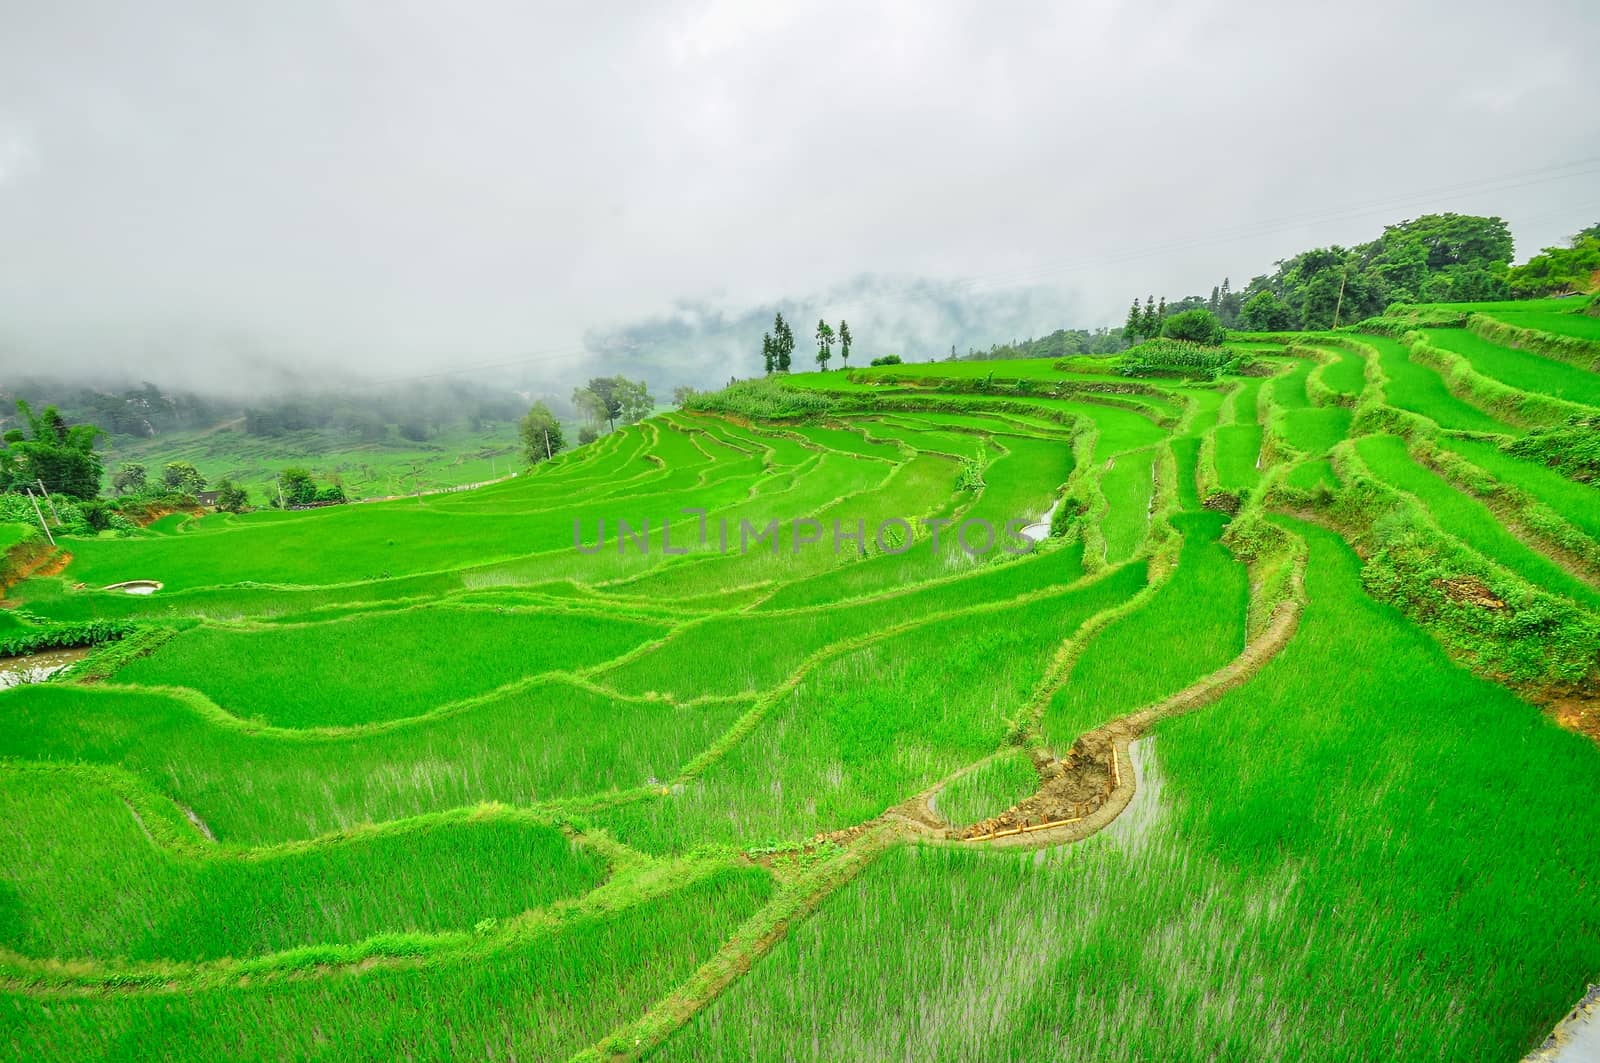 South China, Yunnan - 2011: Rice terraces in highlands of southeastern China, farmhouses, ethnic village. Rice terraces rice paddies Asia, peasant village in mountains China.